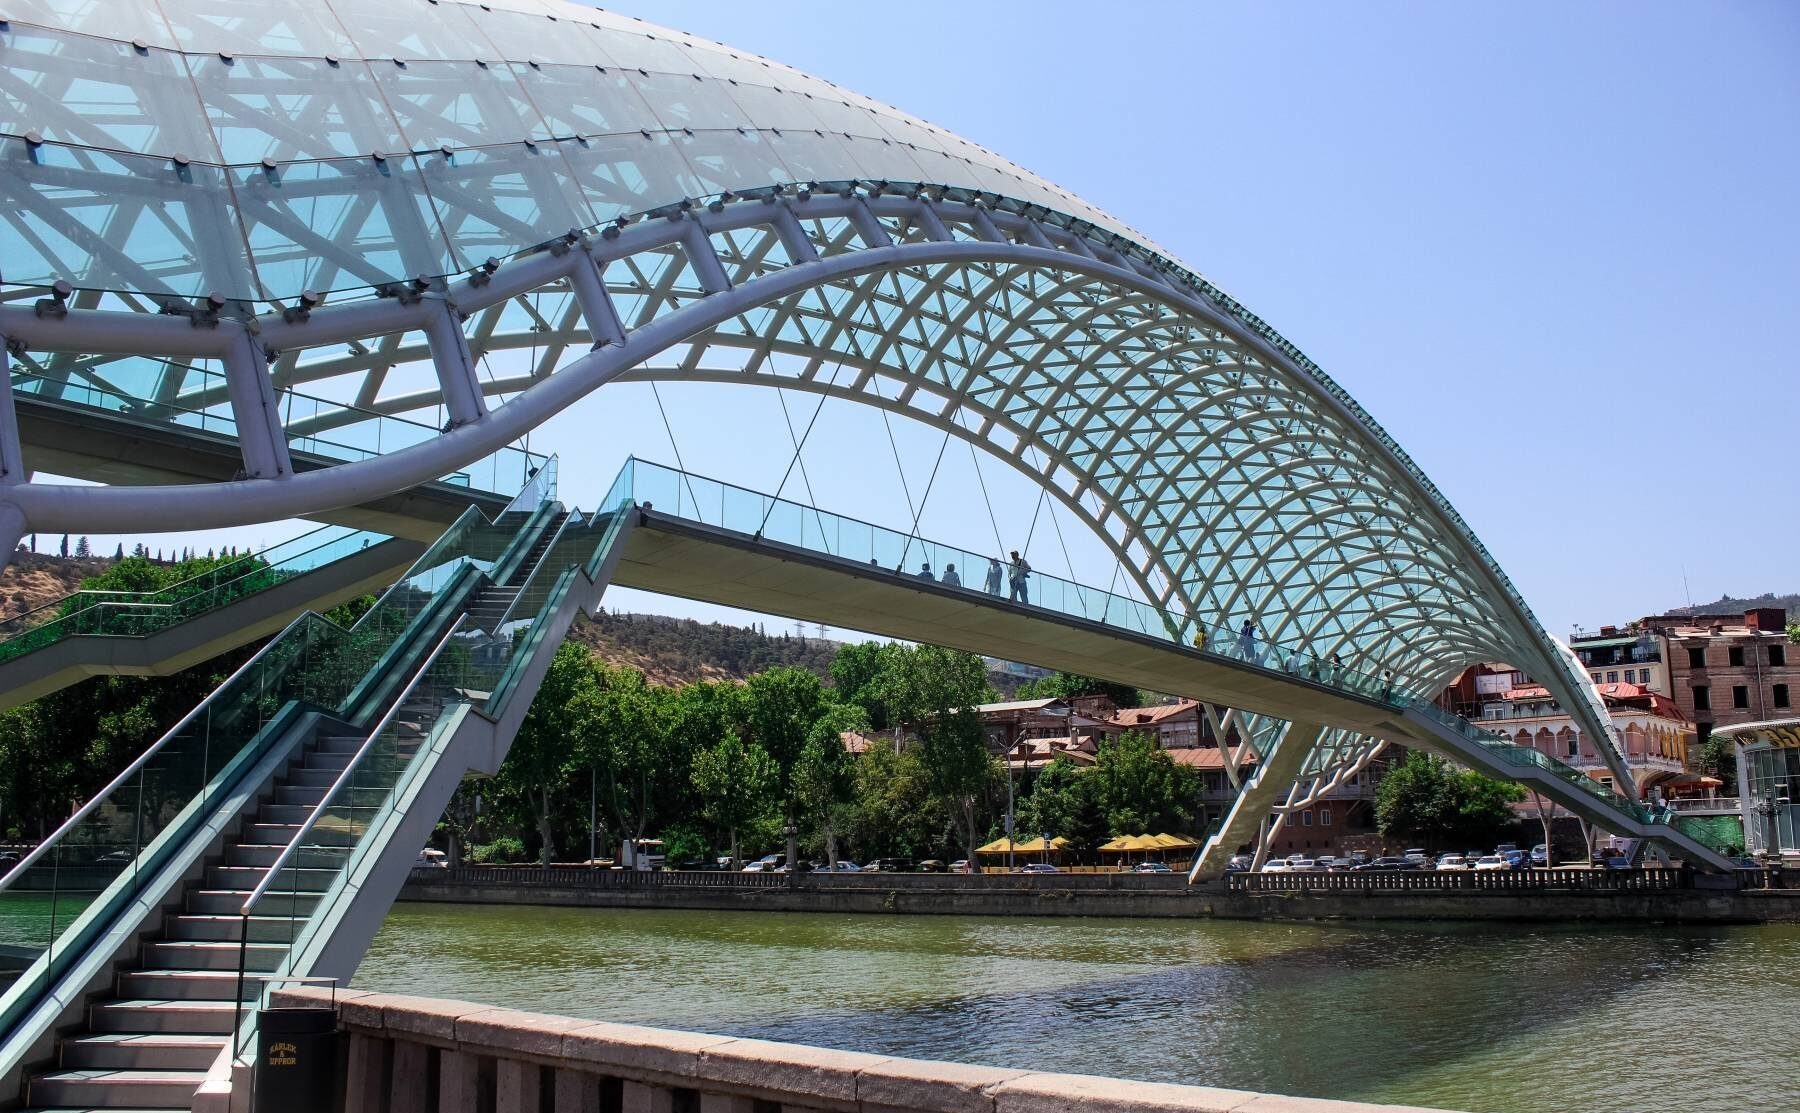 The Peace Bridge of Tbilisi: A Symbol of Unity and Transformation